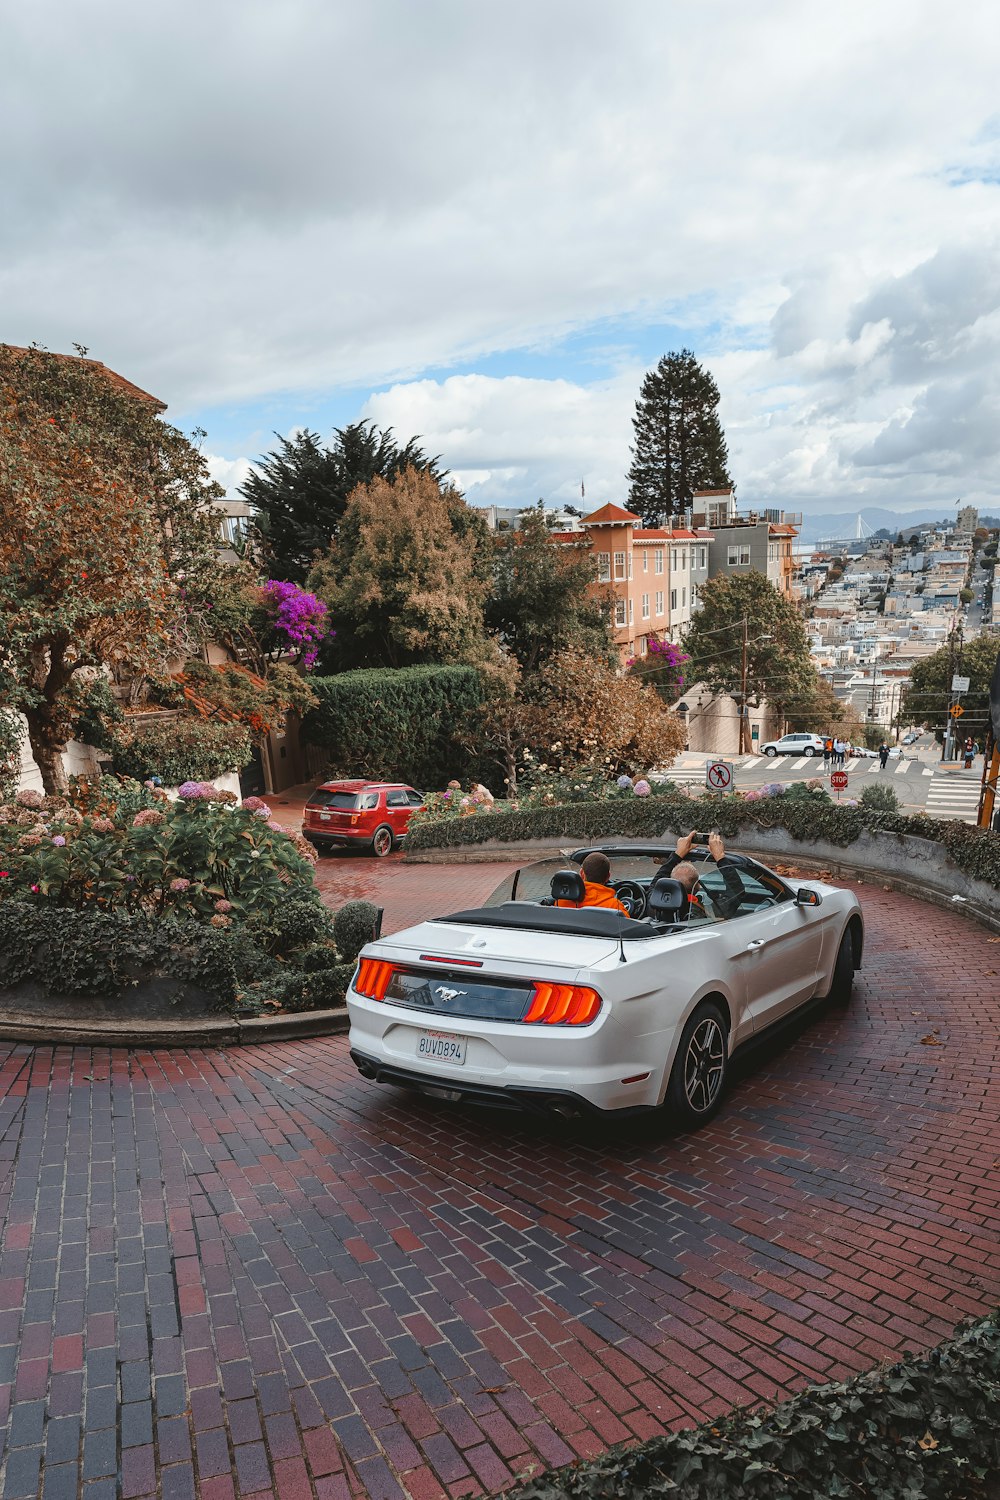 a white sports car with people in it parked on a brick road